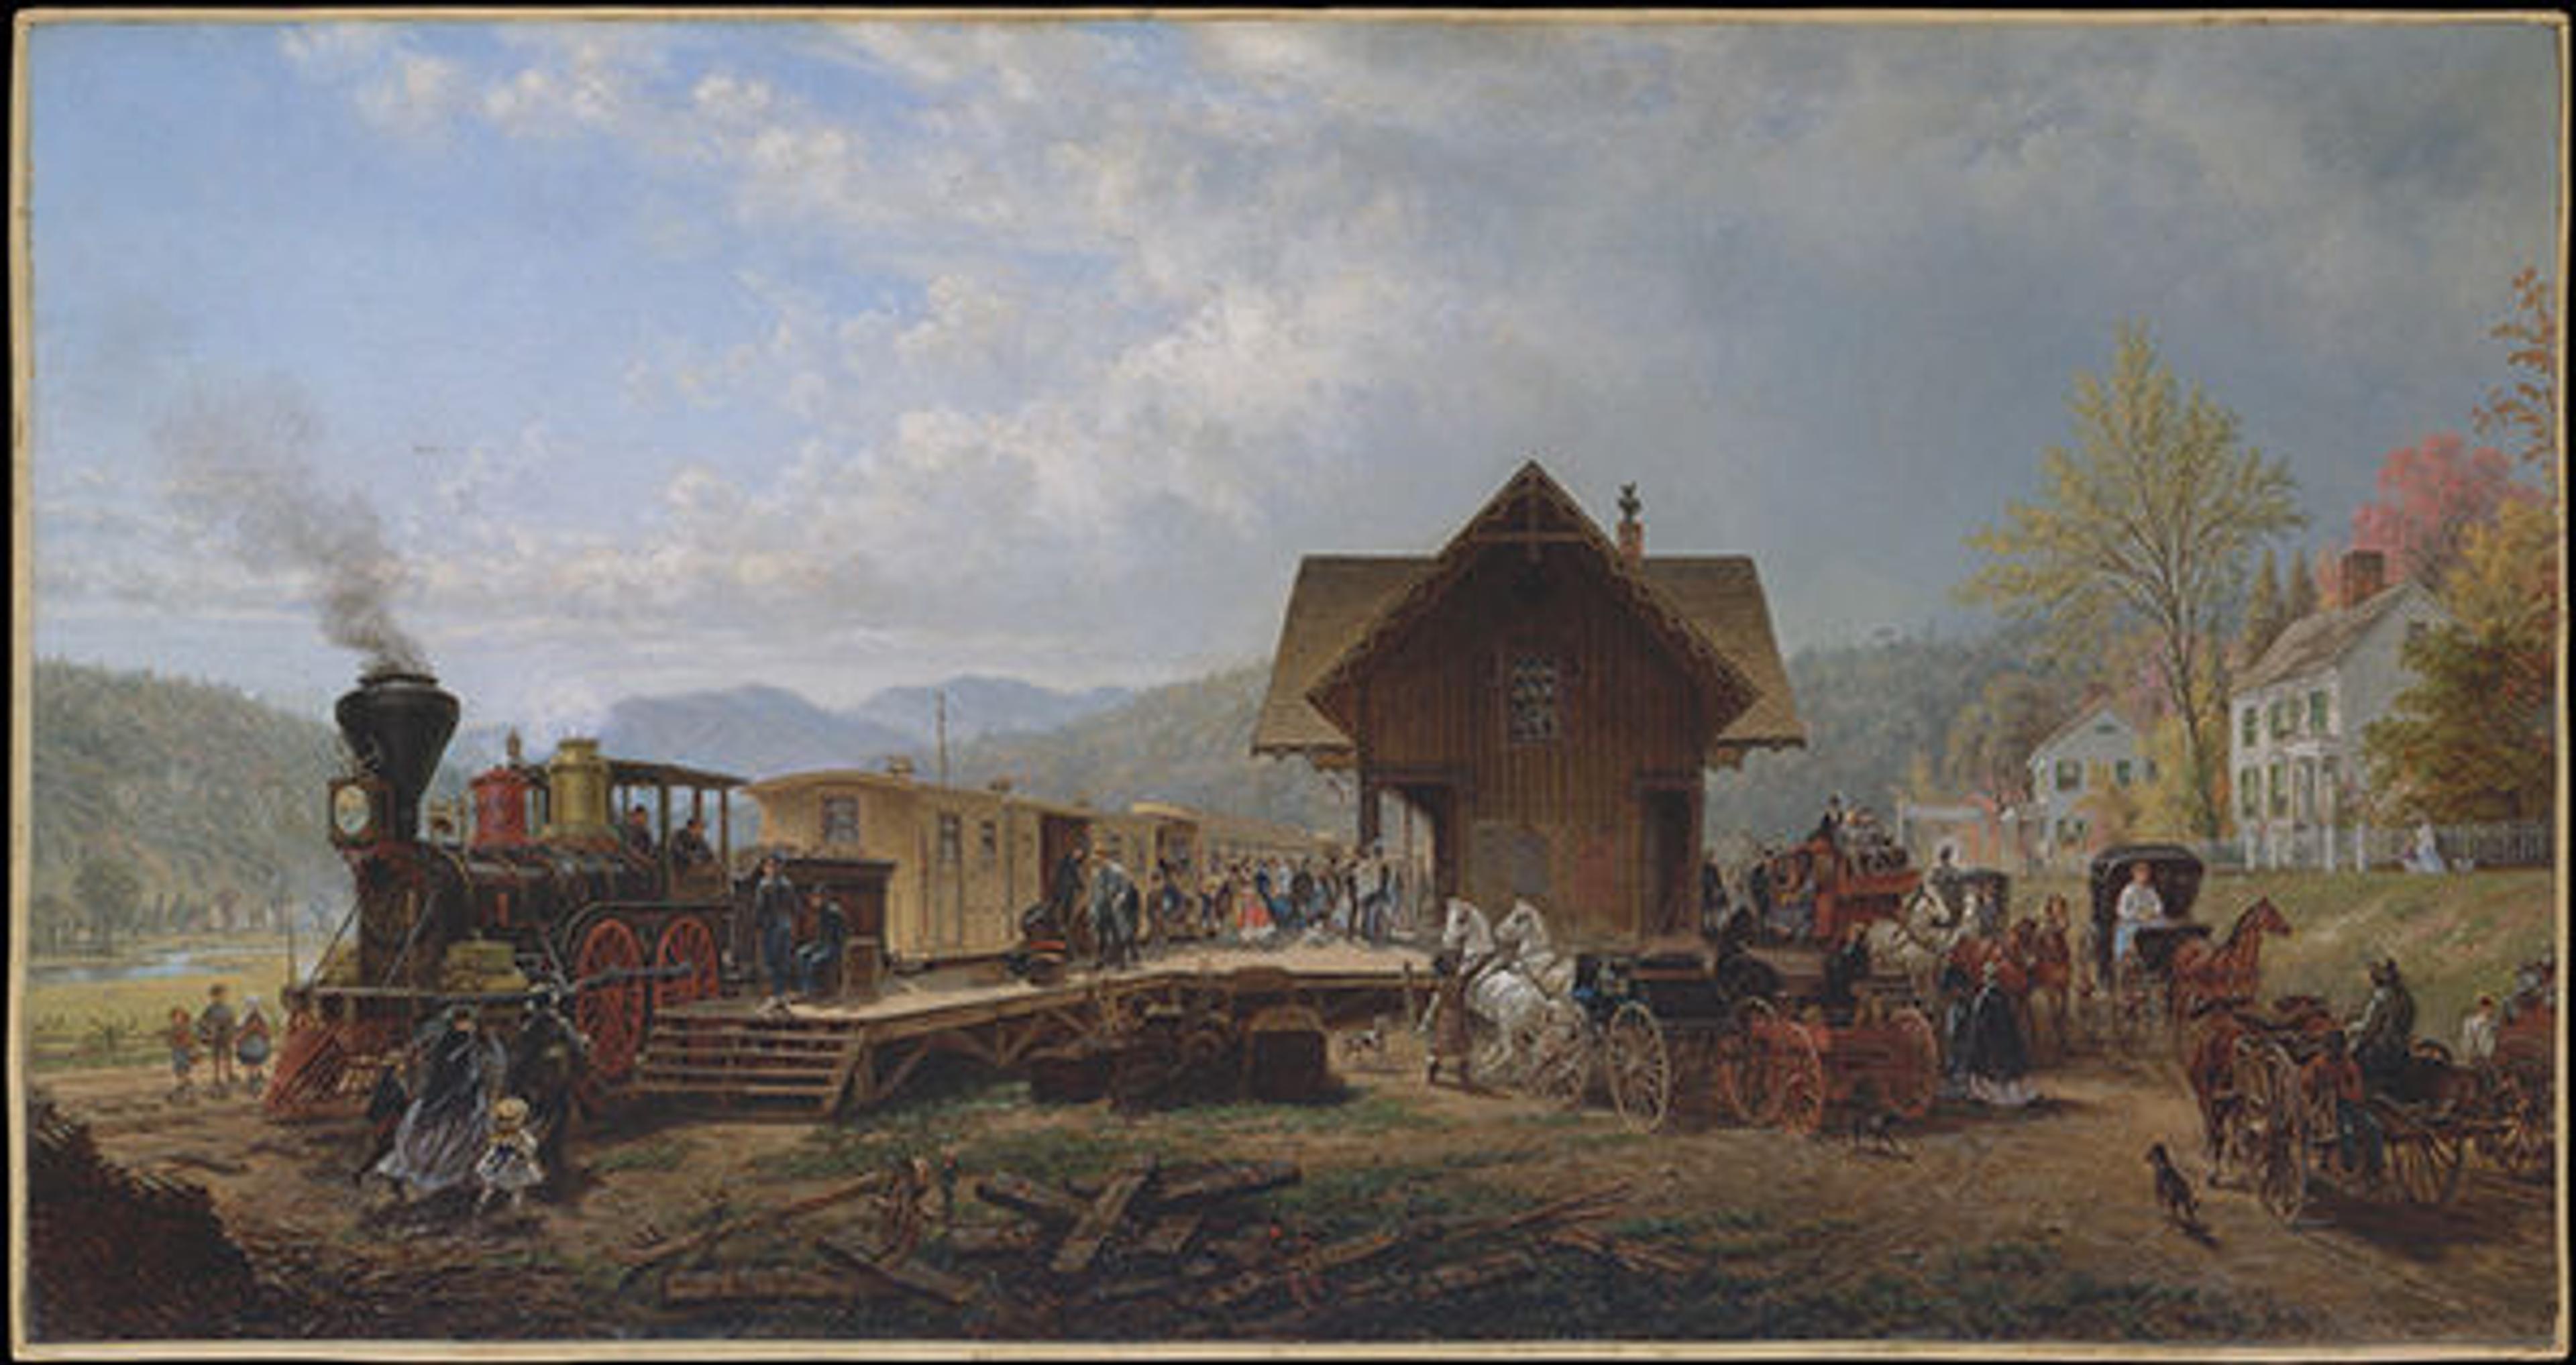 The 9:45 Accommodation, 1867. Oil on canvas; 16 x 30 5/8 in. (40.6 x 77.8 cm). Bequest of Moses Tanenbaum, 1937 (39.47.1)